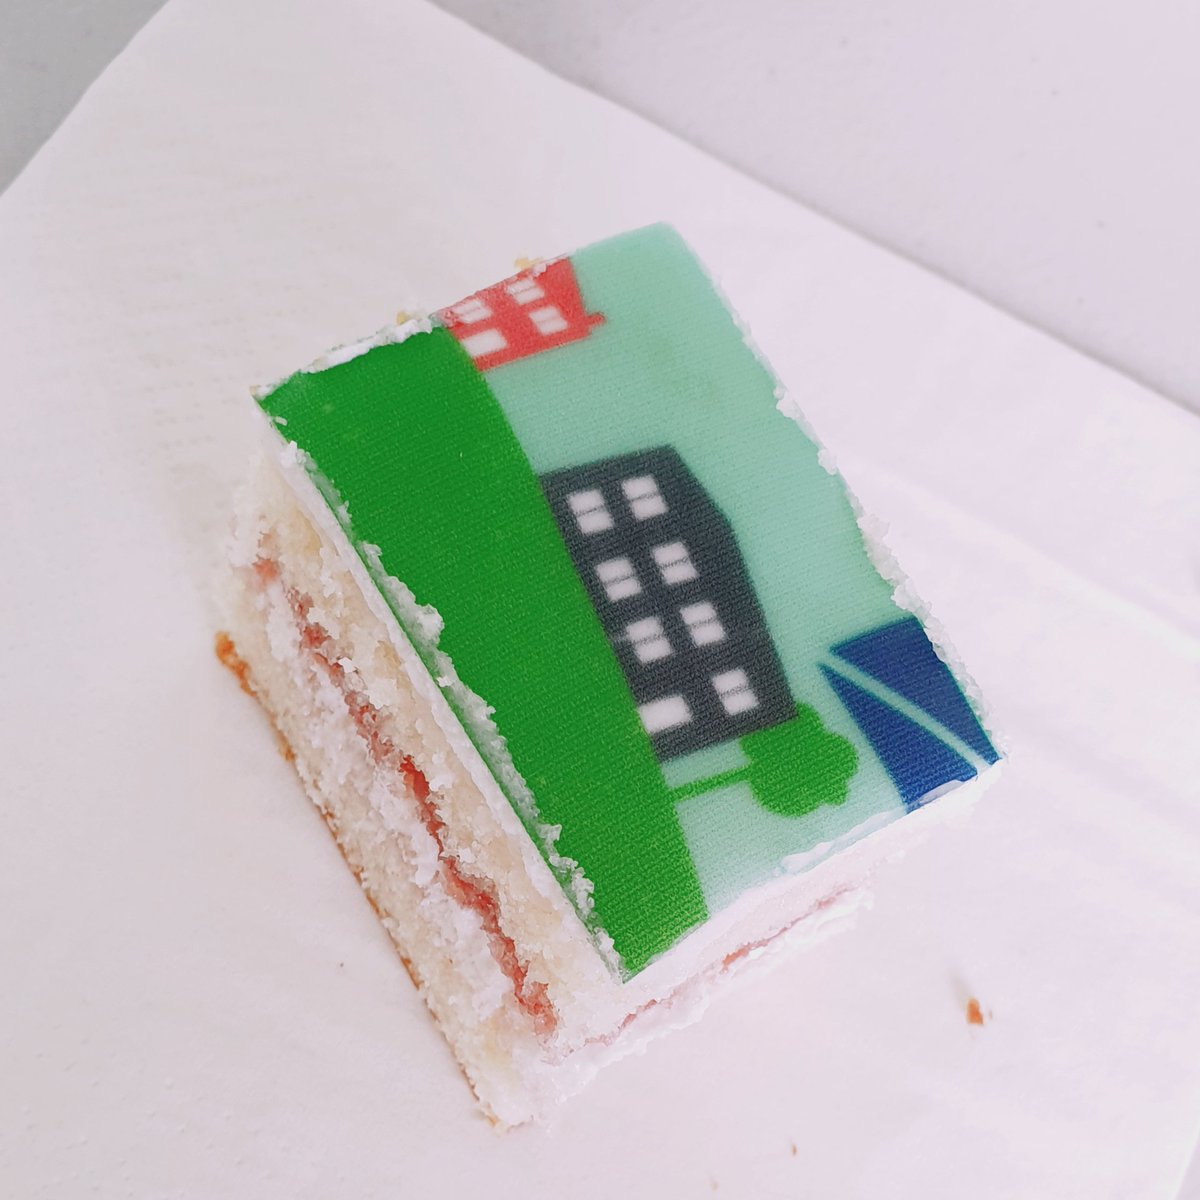 Woop! The sun came out for our opening at Elston. New development of ten rural homes for #affordablerent and #sharedownership @natfednews @NottsCommHA #RuralHousingWeek @Geda_Const  (and yes, branded cake is now a thing ...) 🍰 👍